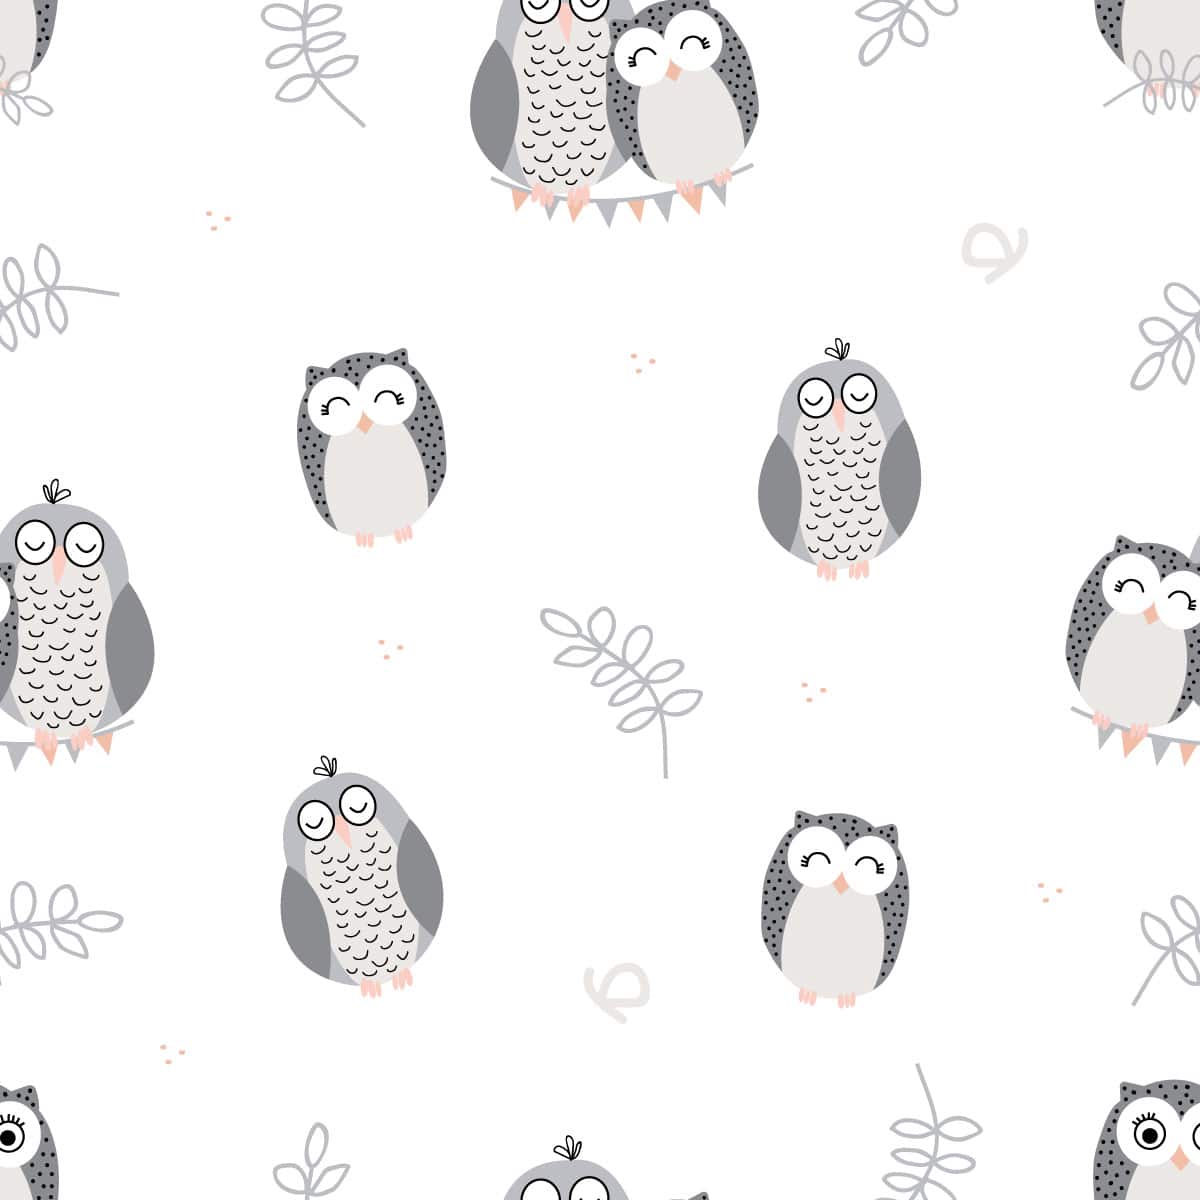 Kids Cute Cartoon Owls and Leaves Wallpaper Pattern - Wall to Wall Graphics